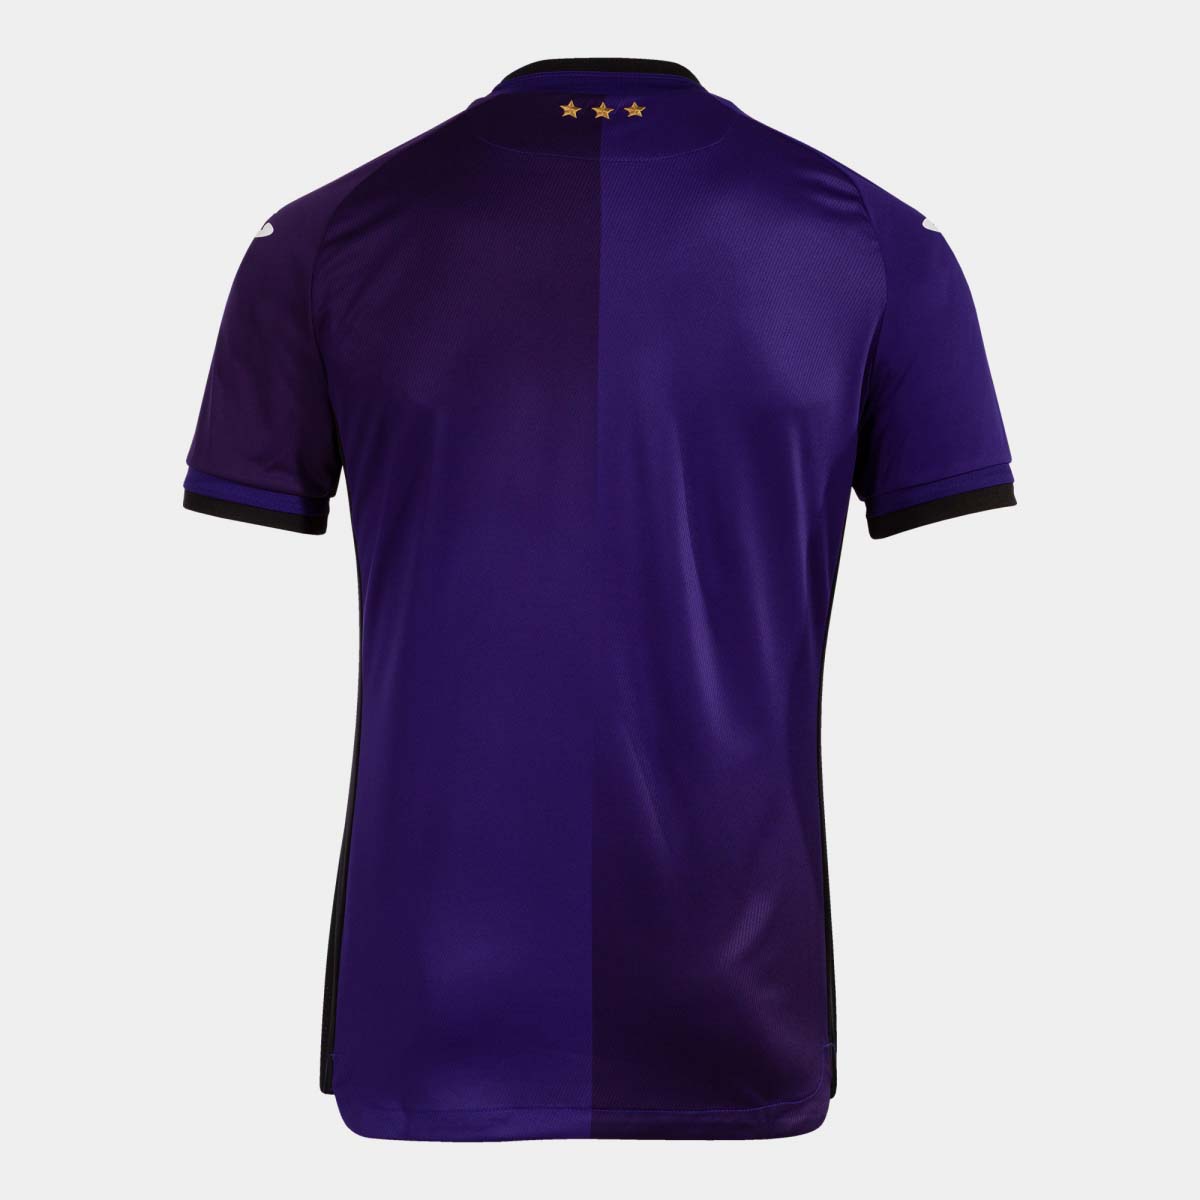 RSCA Home Jersey 2022/2023